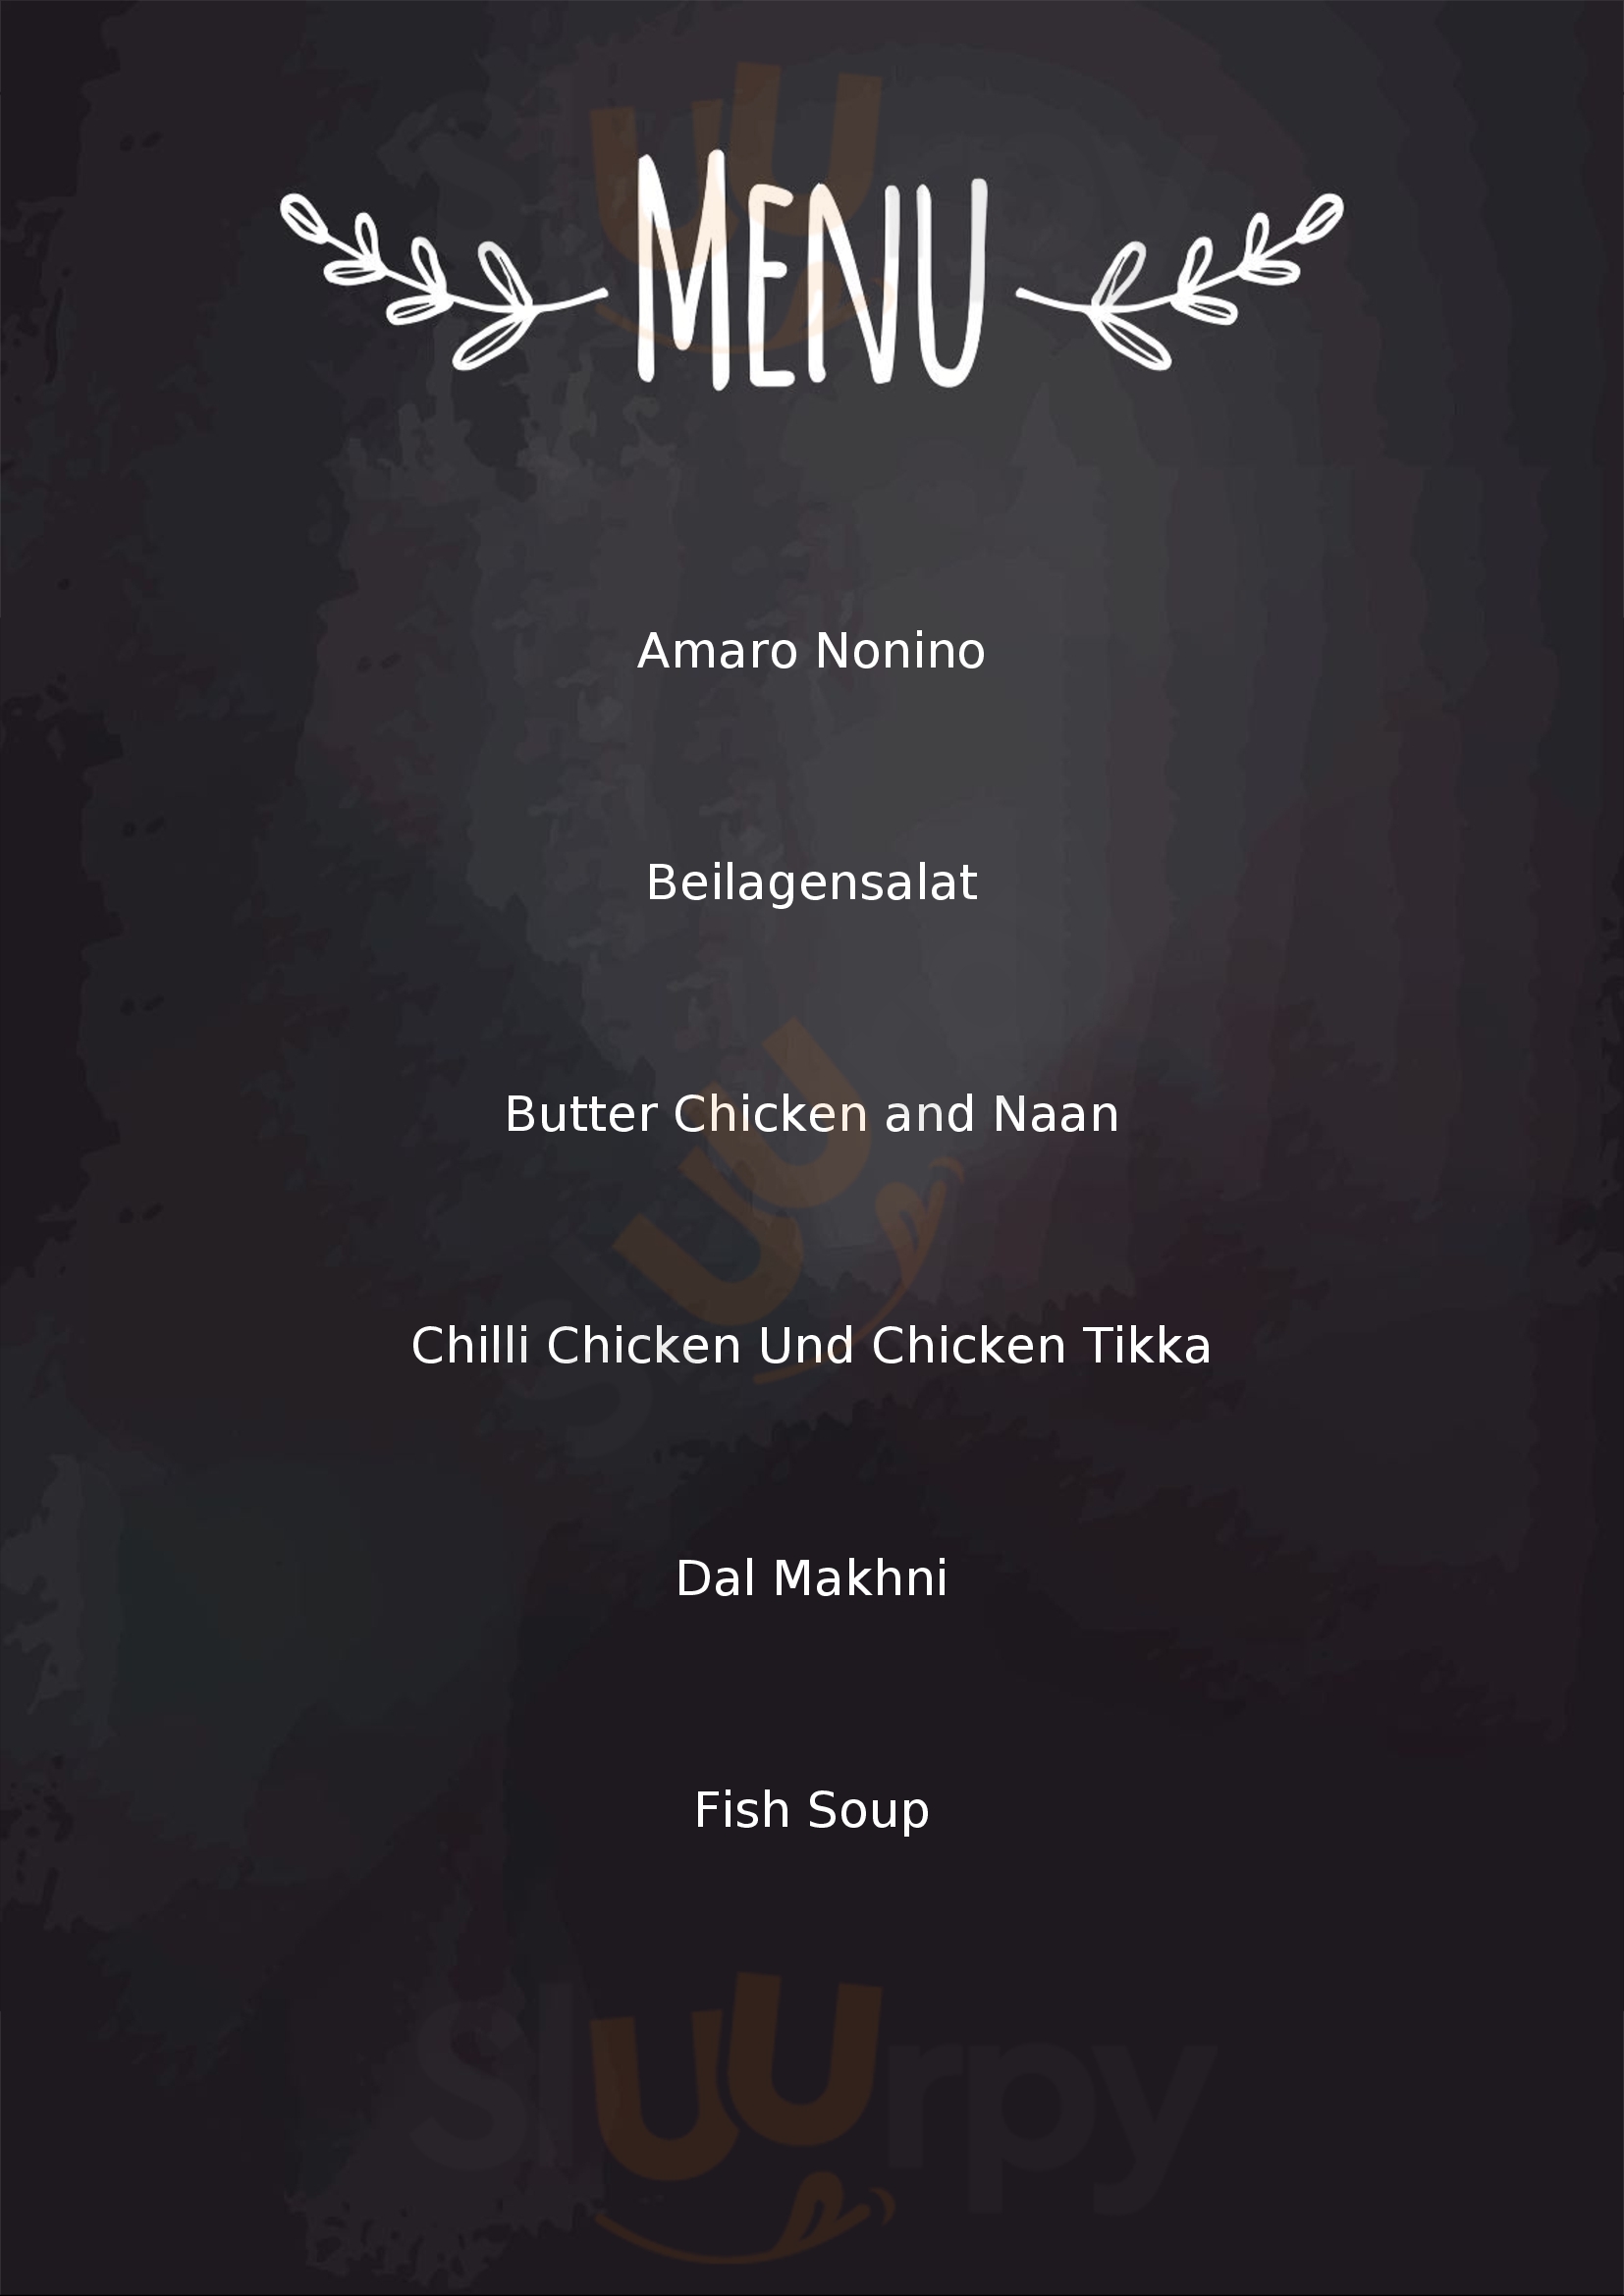 Royal Bombay Palace - Indisches Restaurant Linz Menu - 1